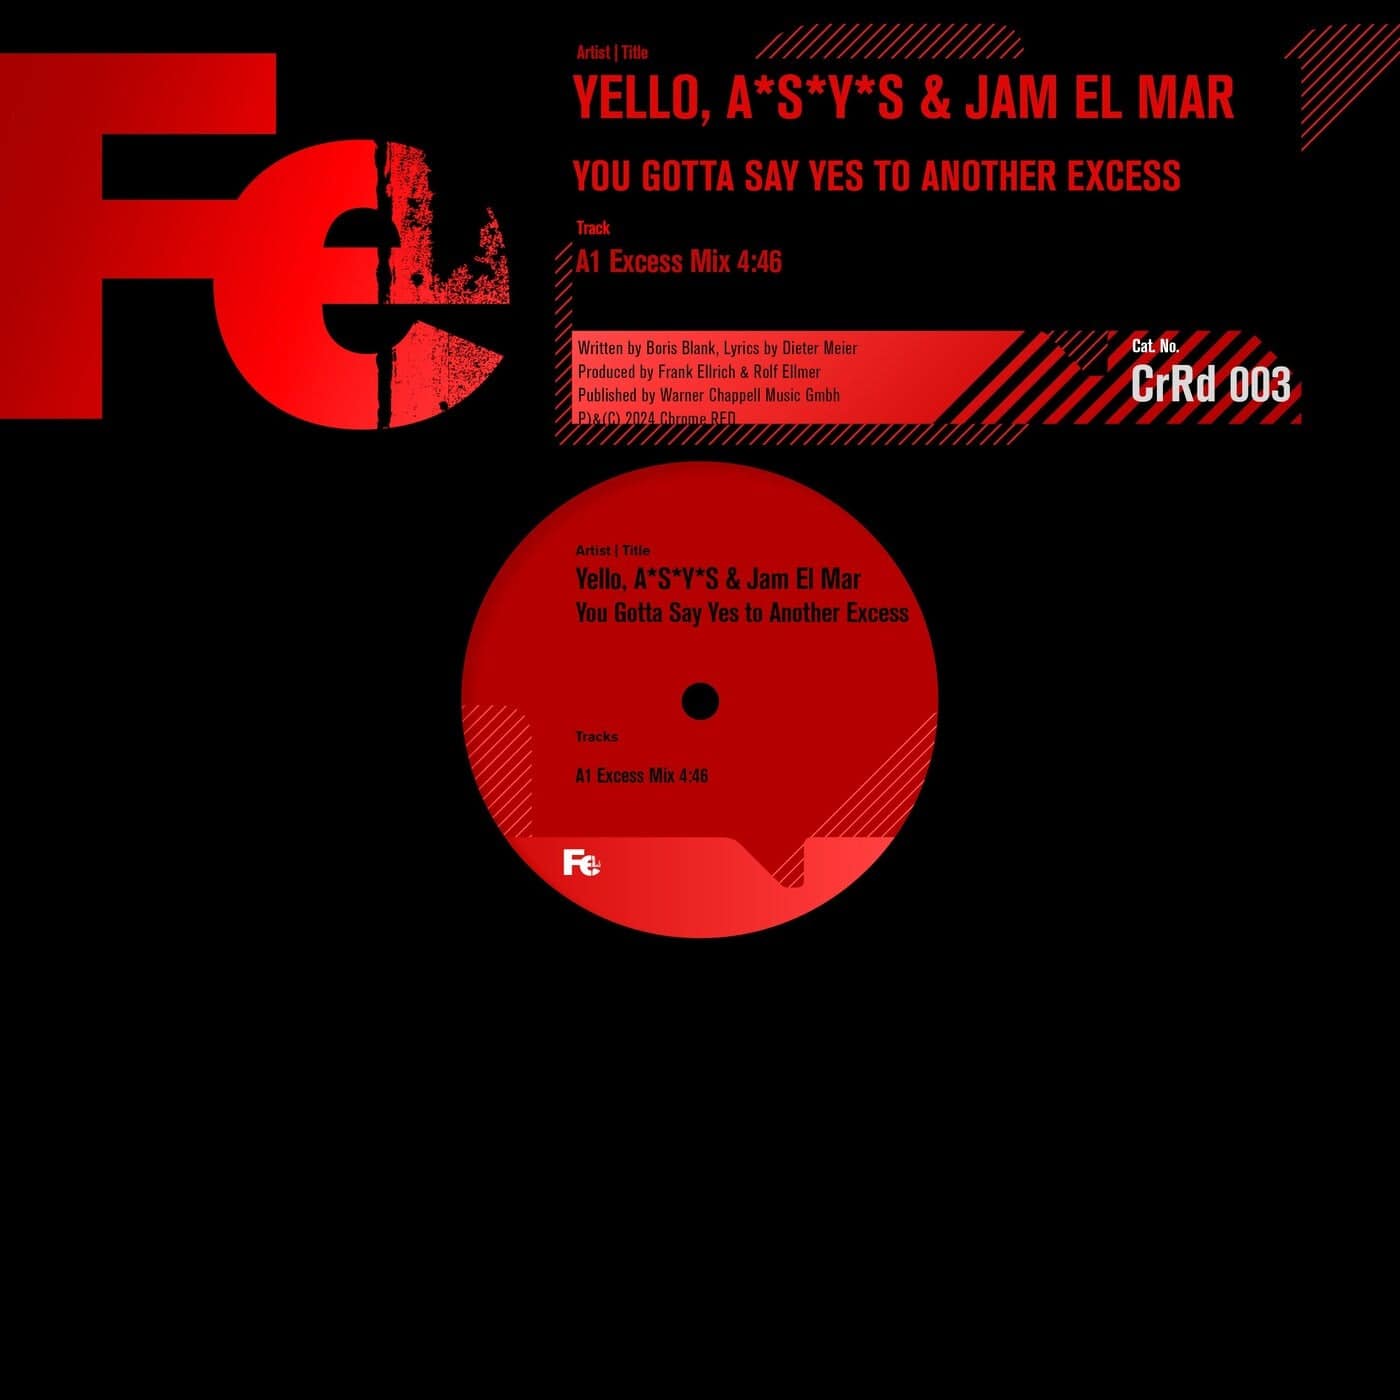 image cover: Yello, Jam El Mar, A*S*Y*S - You Gotta Say Yes to Another Excess (Excess Mix) on Chrome Red